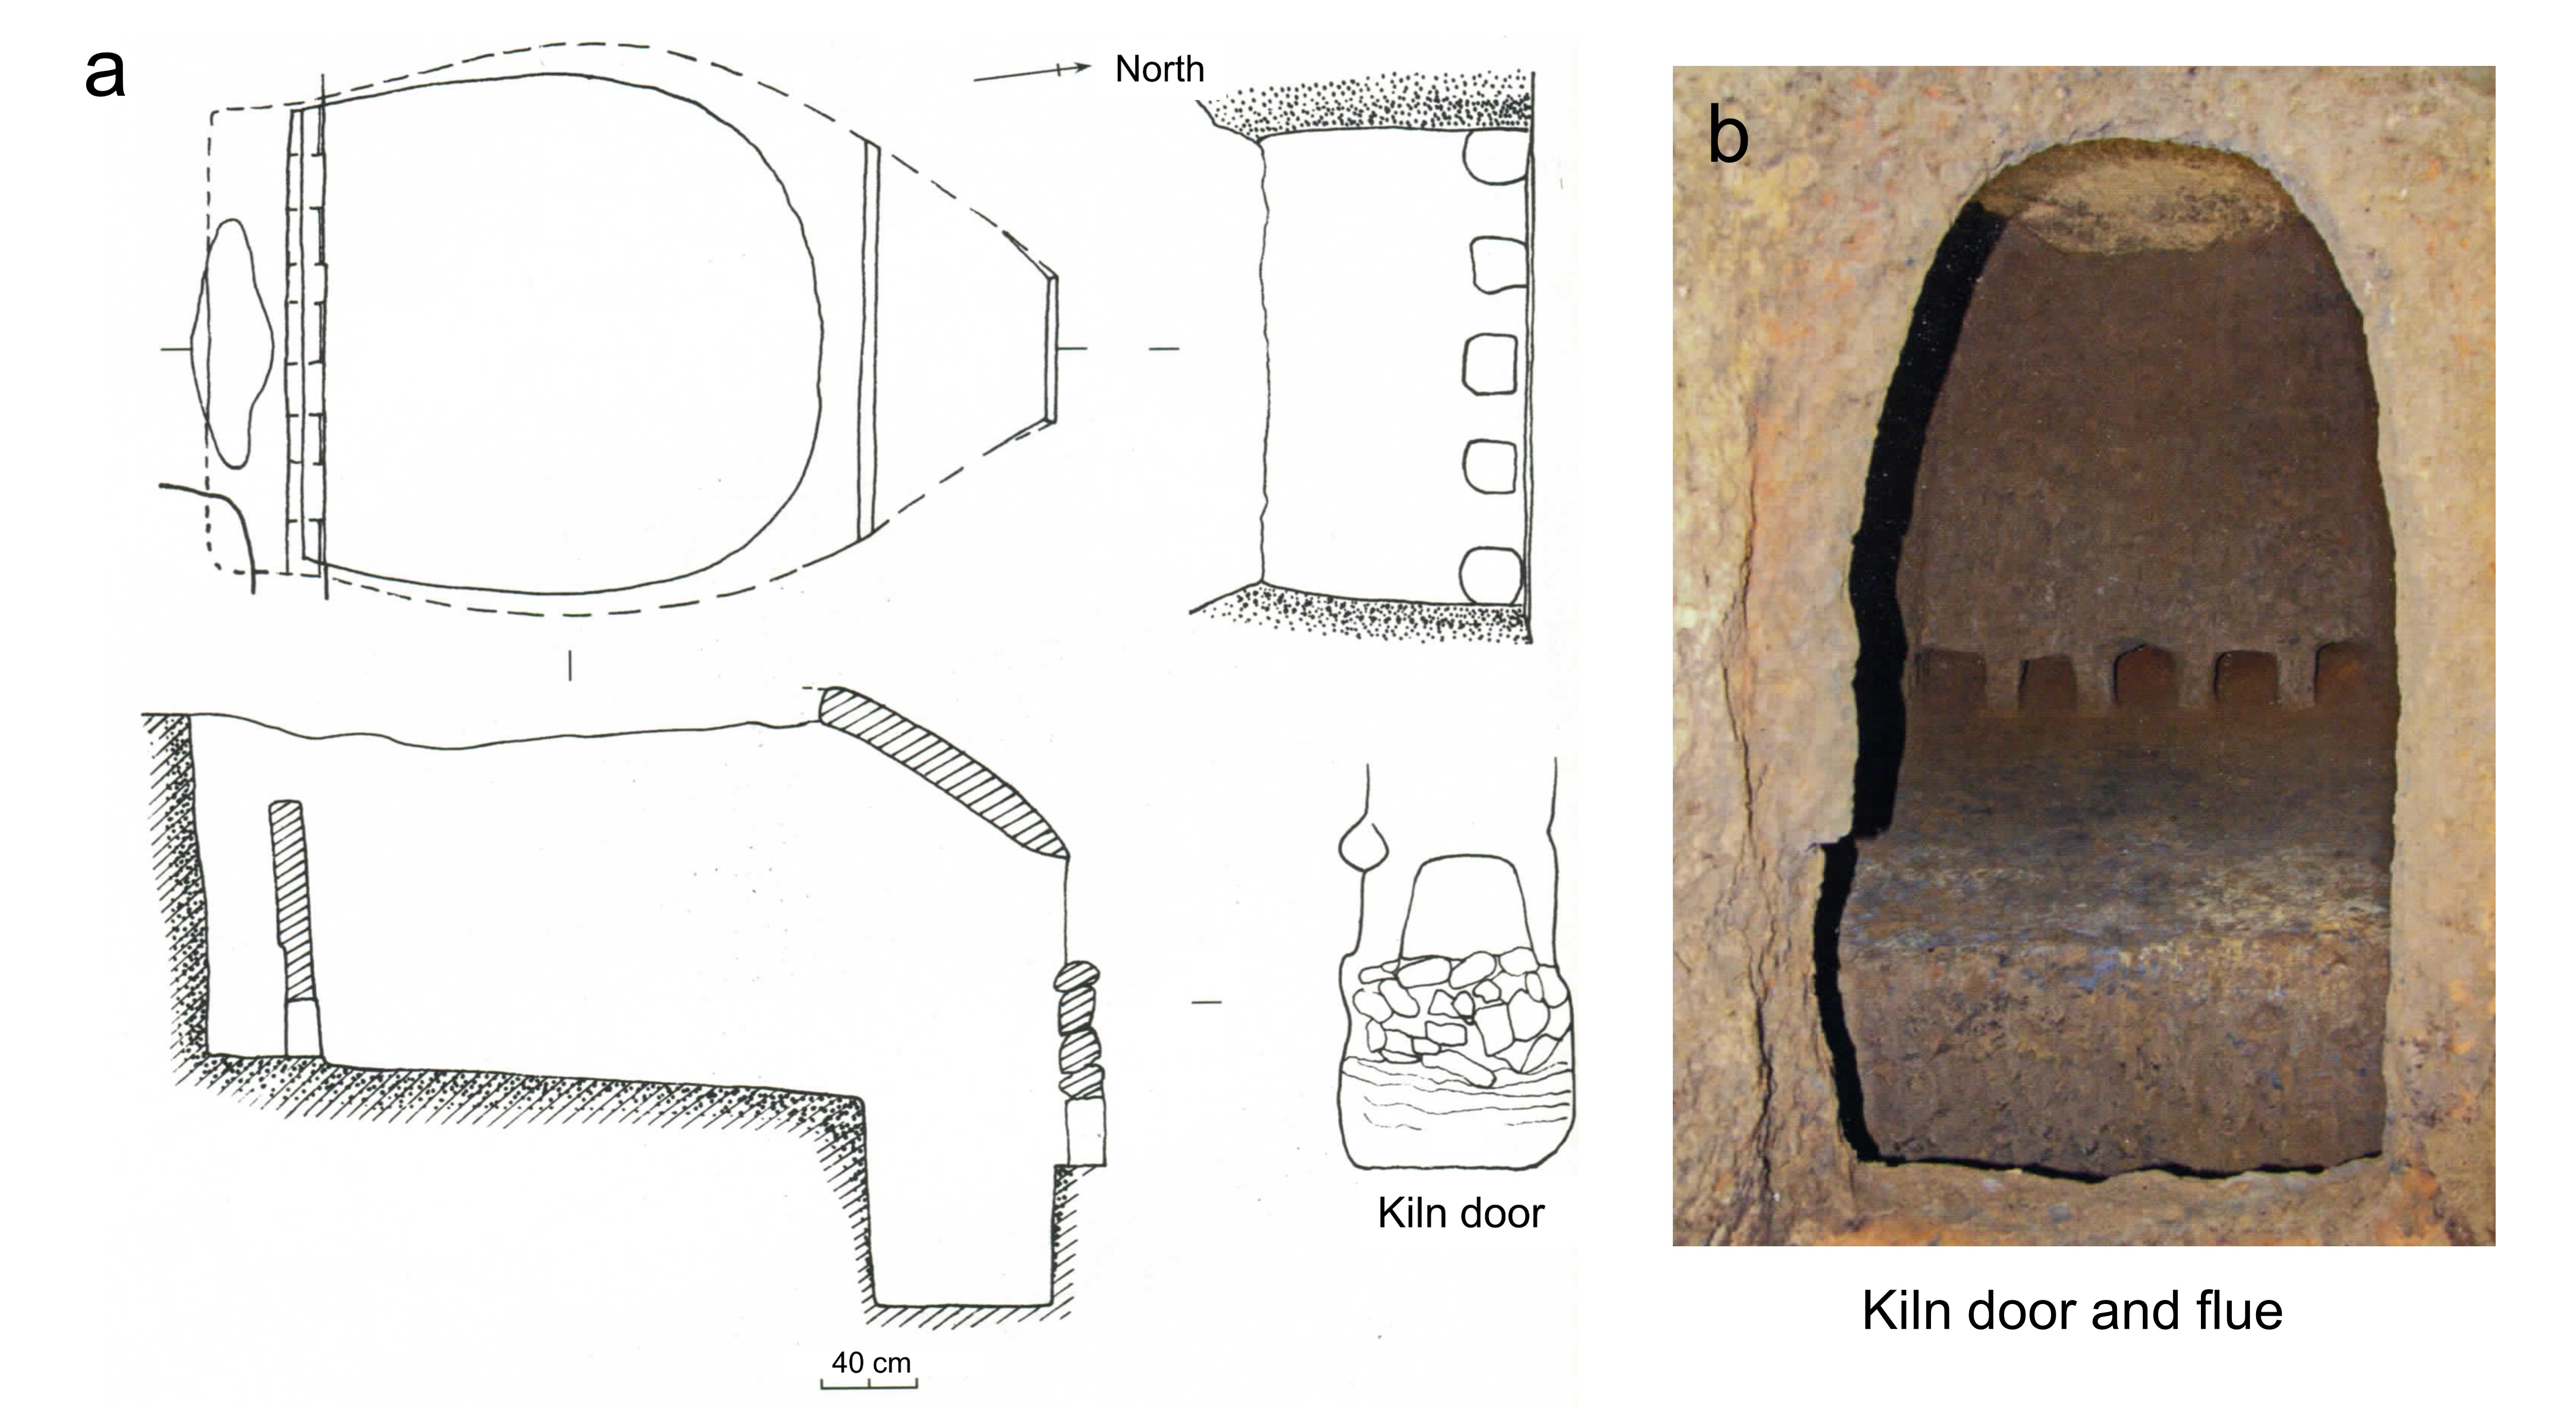 Kilns in the Late Northern Dynasties of Xing kiln